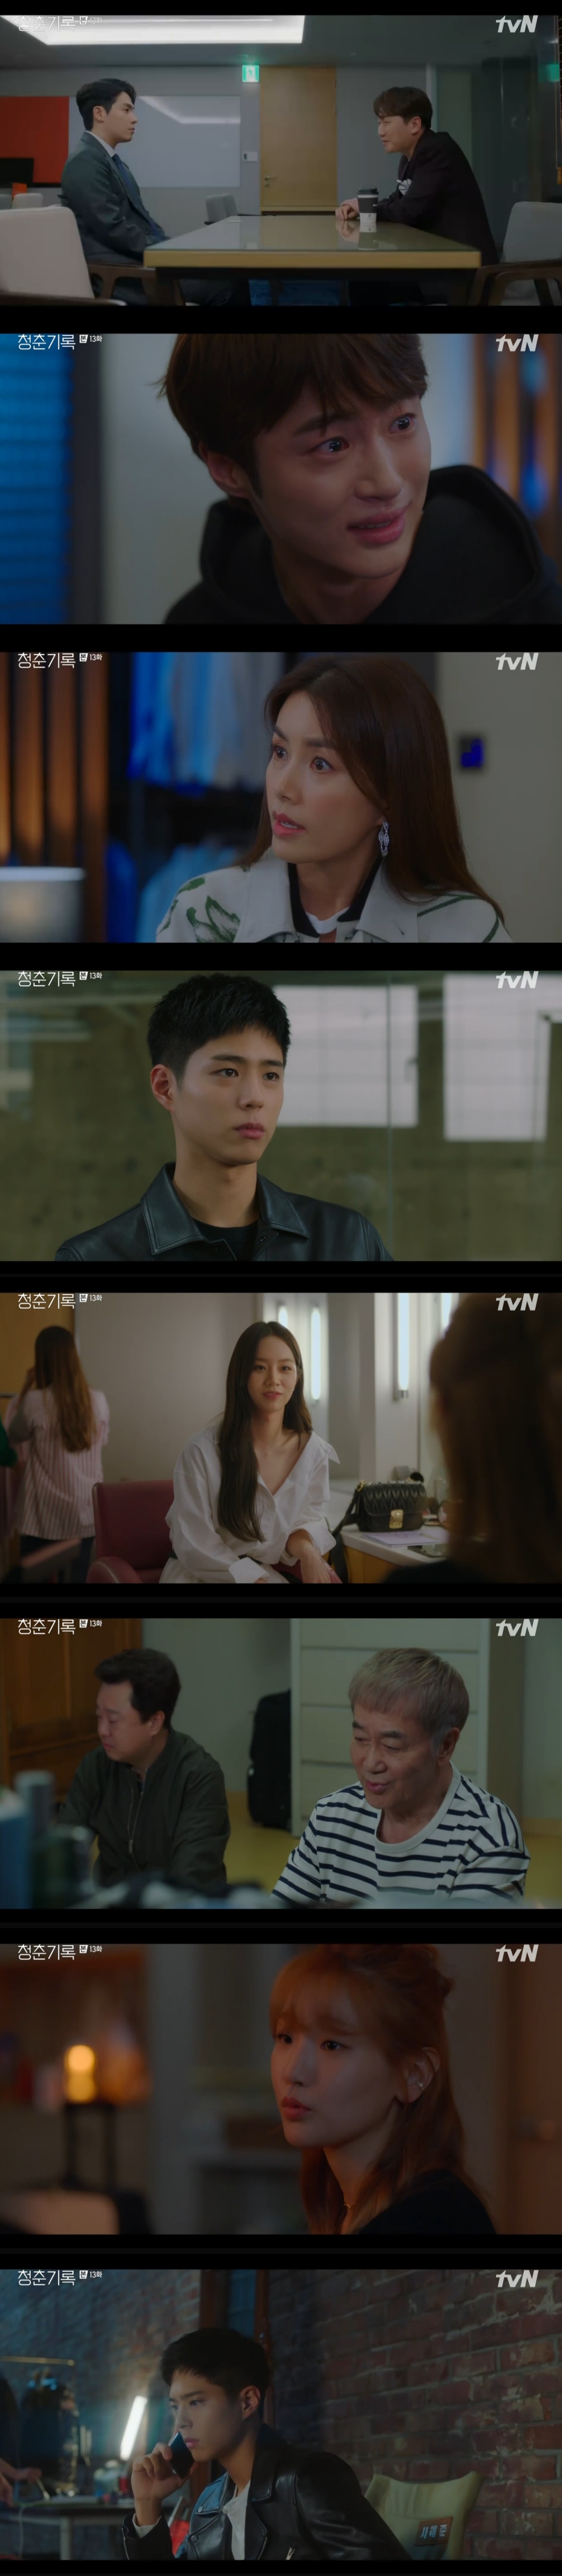 There was an abnormality between Record of Youth Park Bo-gum and Park So-dam.In the TVN drama Record of Youth broadcast on the 19th, the stories of young people surrounding Sa Hye-joon (Park Bo-gum), Park So-dam and Won Hae-hyo (Byeon Woo-suk) got on the air.On this day, Haehyo took Jeongha home. When it rained after finishing the local schedule set earlier, Hyejun contacted Haehyo when he did not answer the phone.I had a conversation with the tea that I had to come in to the house I decided afterwards.Thank you, you called me when you were in trouble, he said. I went out of my mental today and crossed the line. Im sorry. I should not have contacted you.But Haehyo said, I think its a mistake, but you are doing well because Hyejun is a woman friend.You cant like me, he said.At this time, Hye-joon called Jeong-ha and explained that he had not received Jeong-has call before moving abroad on a fan meeting schedule. He hid the fact that he was with Hae-hyo in consideration of Hye-joon.Since then, Hye-joon has visited the shop of Jeongha and said, I am sorry to the story of the actress Jean Seo (Lee Sung-kyung) and the romance that she is shooting together in the drama.Seo Woo and I are friends, he explained. Did you see the article with Seo Woo and me?The drama Hit the jackpot! I have not been able to write your article a day. I do not see entertainment articles because of you these days.I believe you, I believe you, what I saw about you, what you told me, he said, pretending to be indifferent.So do not be hard with that, he said, Lets eat with my mother. My mother wants to buy you rice. On the other hand, Haehyo was angry when he found out that his mother Lee Young (Shin Ae-ra) manipulated his SNS follower number: You showed me that I can succeed on my own.I asked you to respect that one thing. Im embarrassed. What would I do? How do you live with your head? After that, Haehyo called Jungha to be comforted, and sat side by side on the playground swing and said, I will sit down and go.Why did you call me when you will not let me speak?In addition, Hyejoon and Haehyo met on the set, and Haehyo told Jungha, I will go to Lee Hye-Ri makeup interview today.Hye-joon asked, How do you know that? Hae-hyo said, I introduced you.At that time, I received a notice of acceptance as soon as I met Lee Hye-Ri (Hye Ri), who was determined.You are a real life benefactor. He then informed me that Haehyo was with Hyejun, and soon he informed Hyejun that he would call Hyejun.Hye-joon felt sad as she waited for Jeong-has call, and finally Hye-joon entered her house and waited, and she expressed concern about Hye-joons scandal, which Min-jae later gave her.What do you do when you break up with you? He surprised Hye-joon by mentioning the farewell. Hye-joon asked, Are we breaking up?Since then, Hyejoon has said, Why do not you call me and tell me why you are happy? And said, You are busy.Hye-joon said, I have never been in touch with you before, and I have come to you in time. He said, I am doing my best even though it is a murderous schedule.Im doing my best. I need to make it easier for you to see for a moment.At the end of the broadcast, an article was reported that Sa Hye-joon was the last caller of Charlie Jung-jun, raising tension in the drama.